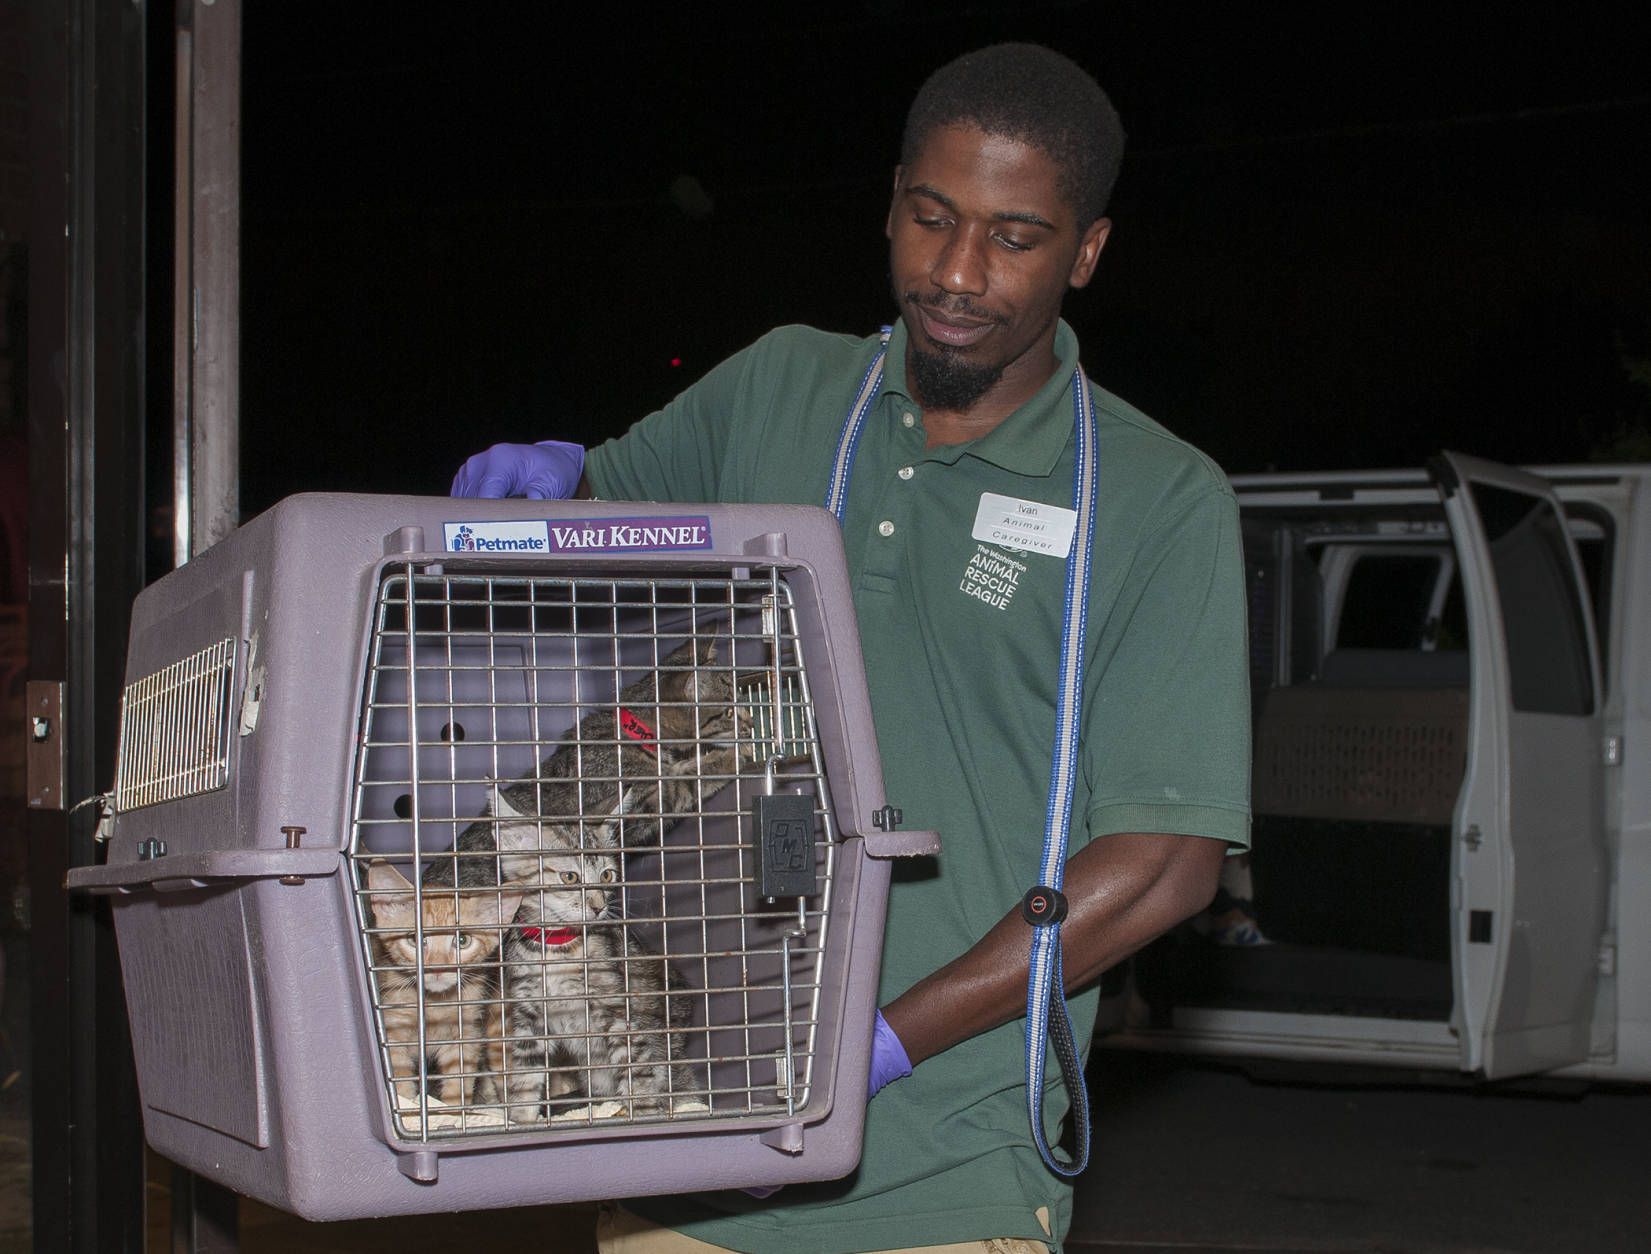 ASPCA transported eight dogs and about 10 kittens to the Washington Humane Society-Washington Animal Rescue League from a shelter in a Beaufort County, South Carolina as Hurricane Matthew barrels toward the region. (Courtesy WHS-WARL)